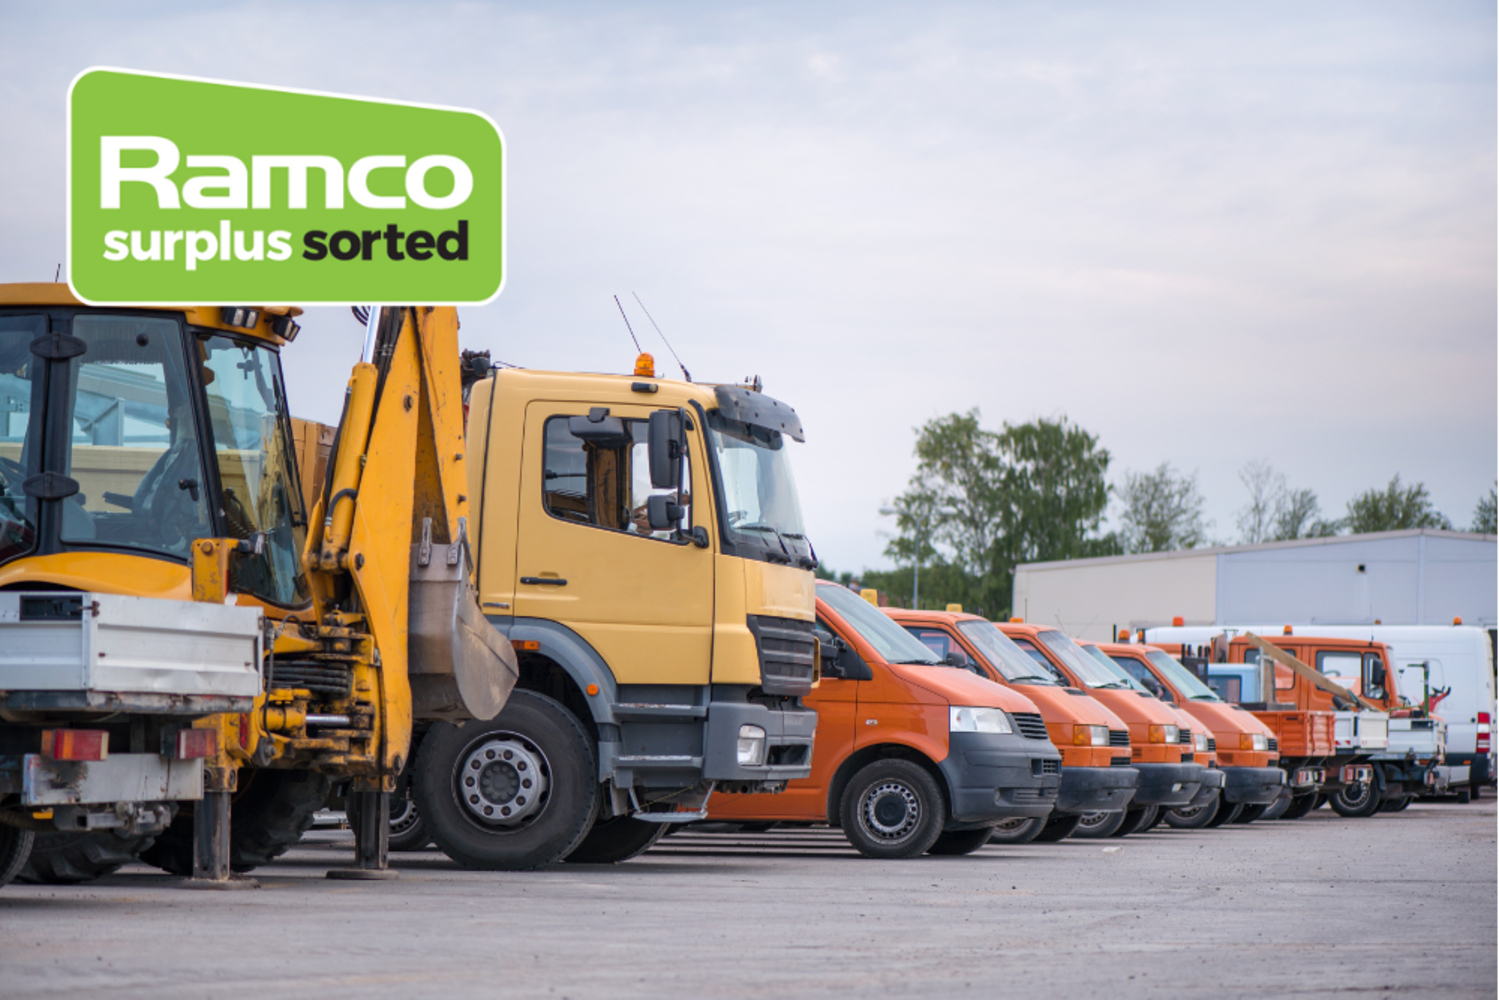 Coming soon - Commercial vehicles, plant and machinery - entries invited contact sales@ramco.co.uk or call 01754 880880